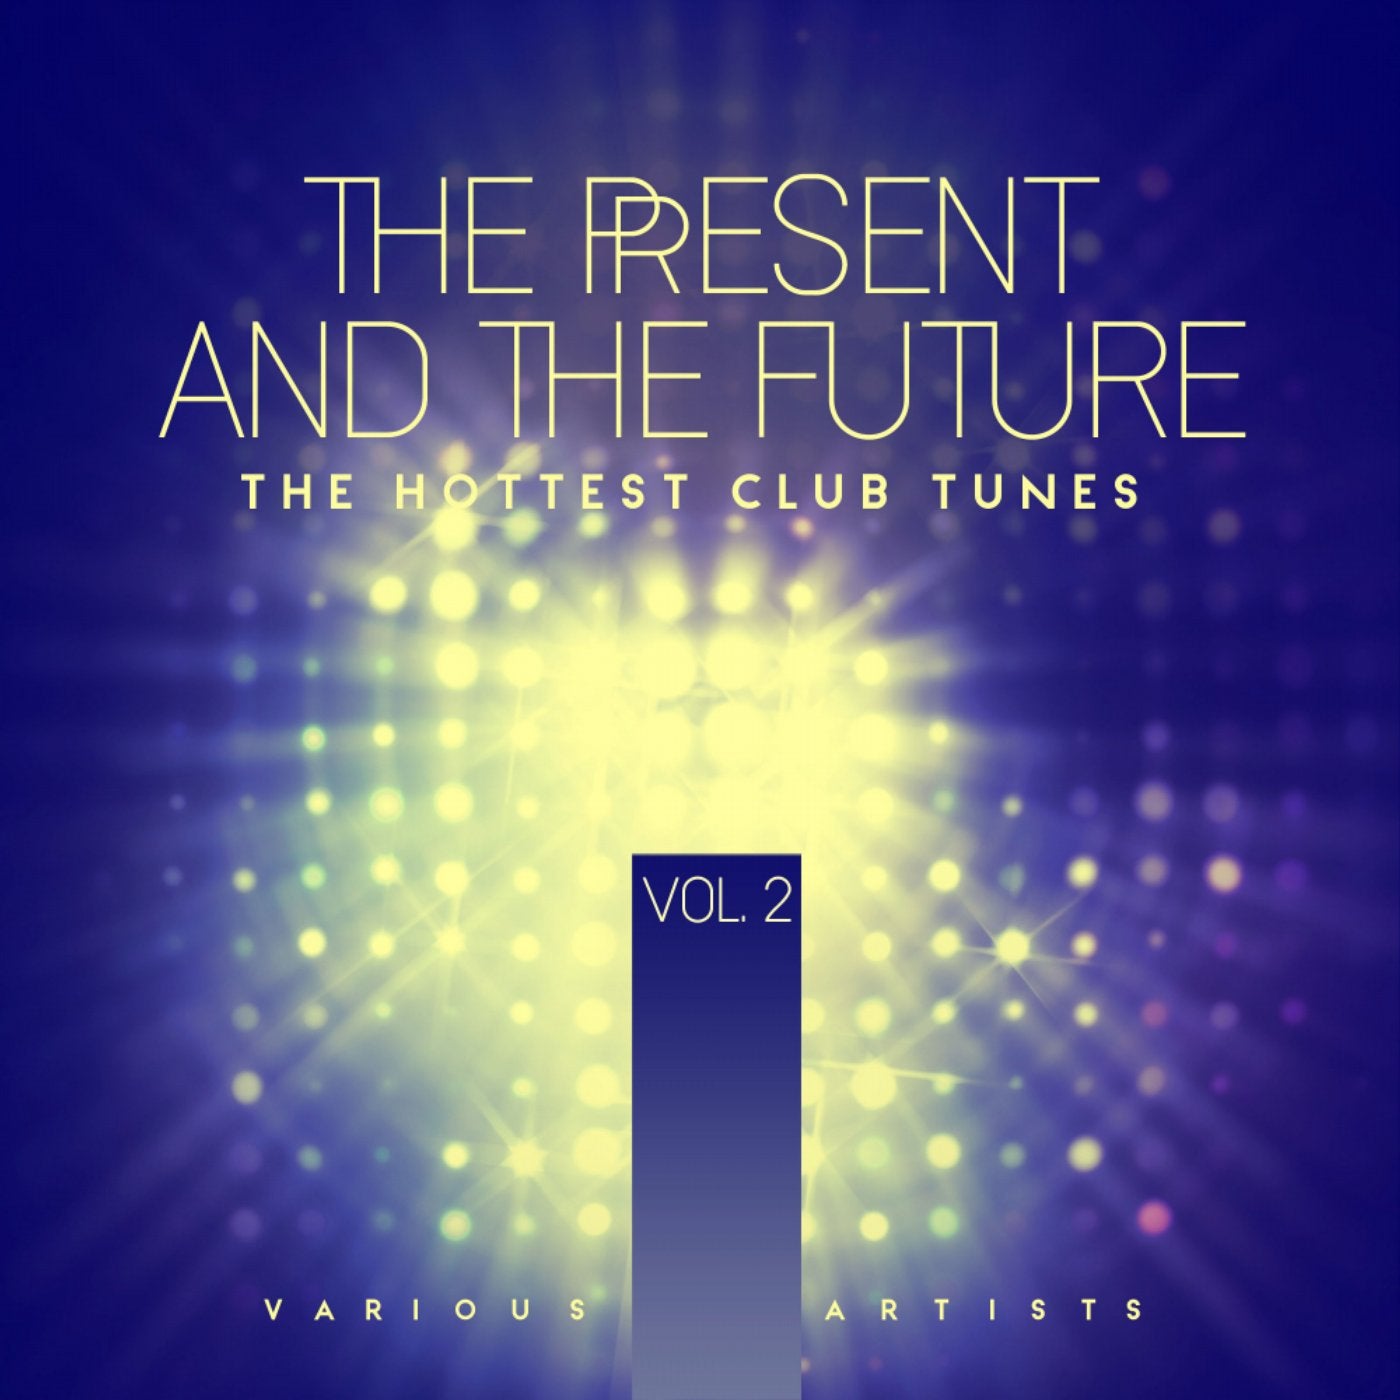 The Present And The Future (The Hottest Club Tunes), Vol. 2